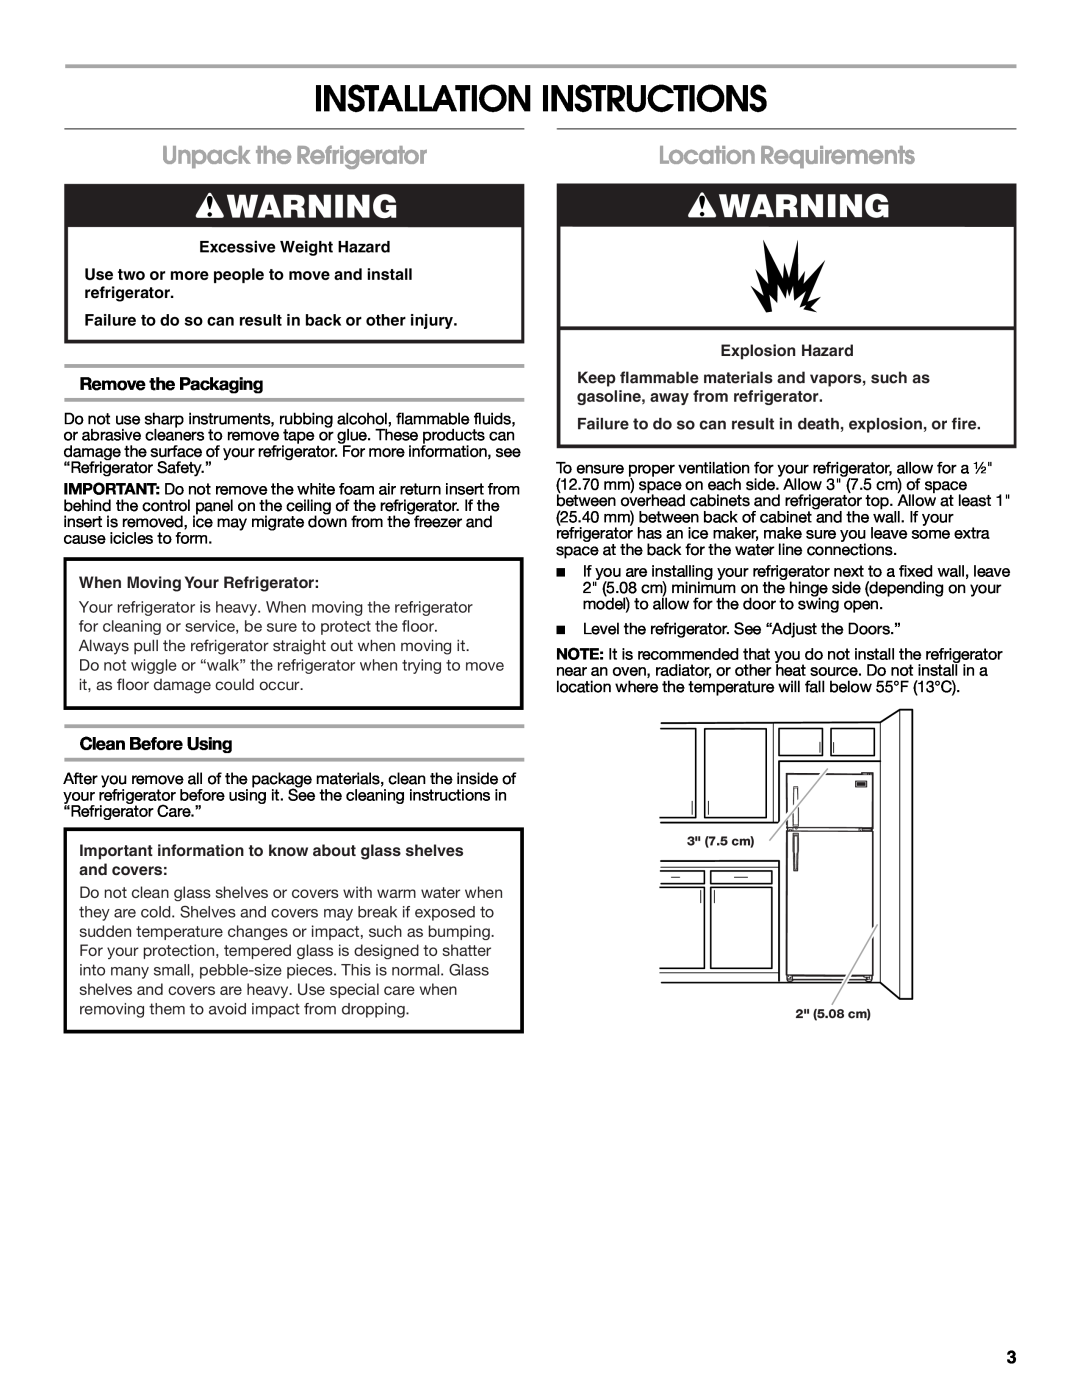 Whirlpool RT14BKXSQ00 Installation Instructions, Unpack the Refrigerator, Location Requirements, Remove the Packaging 